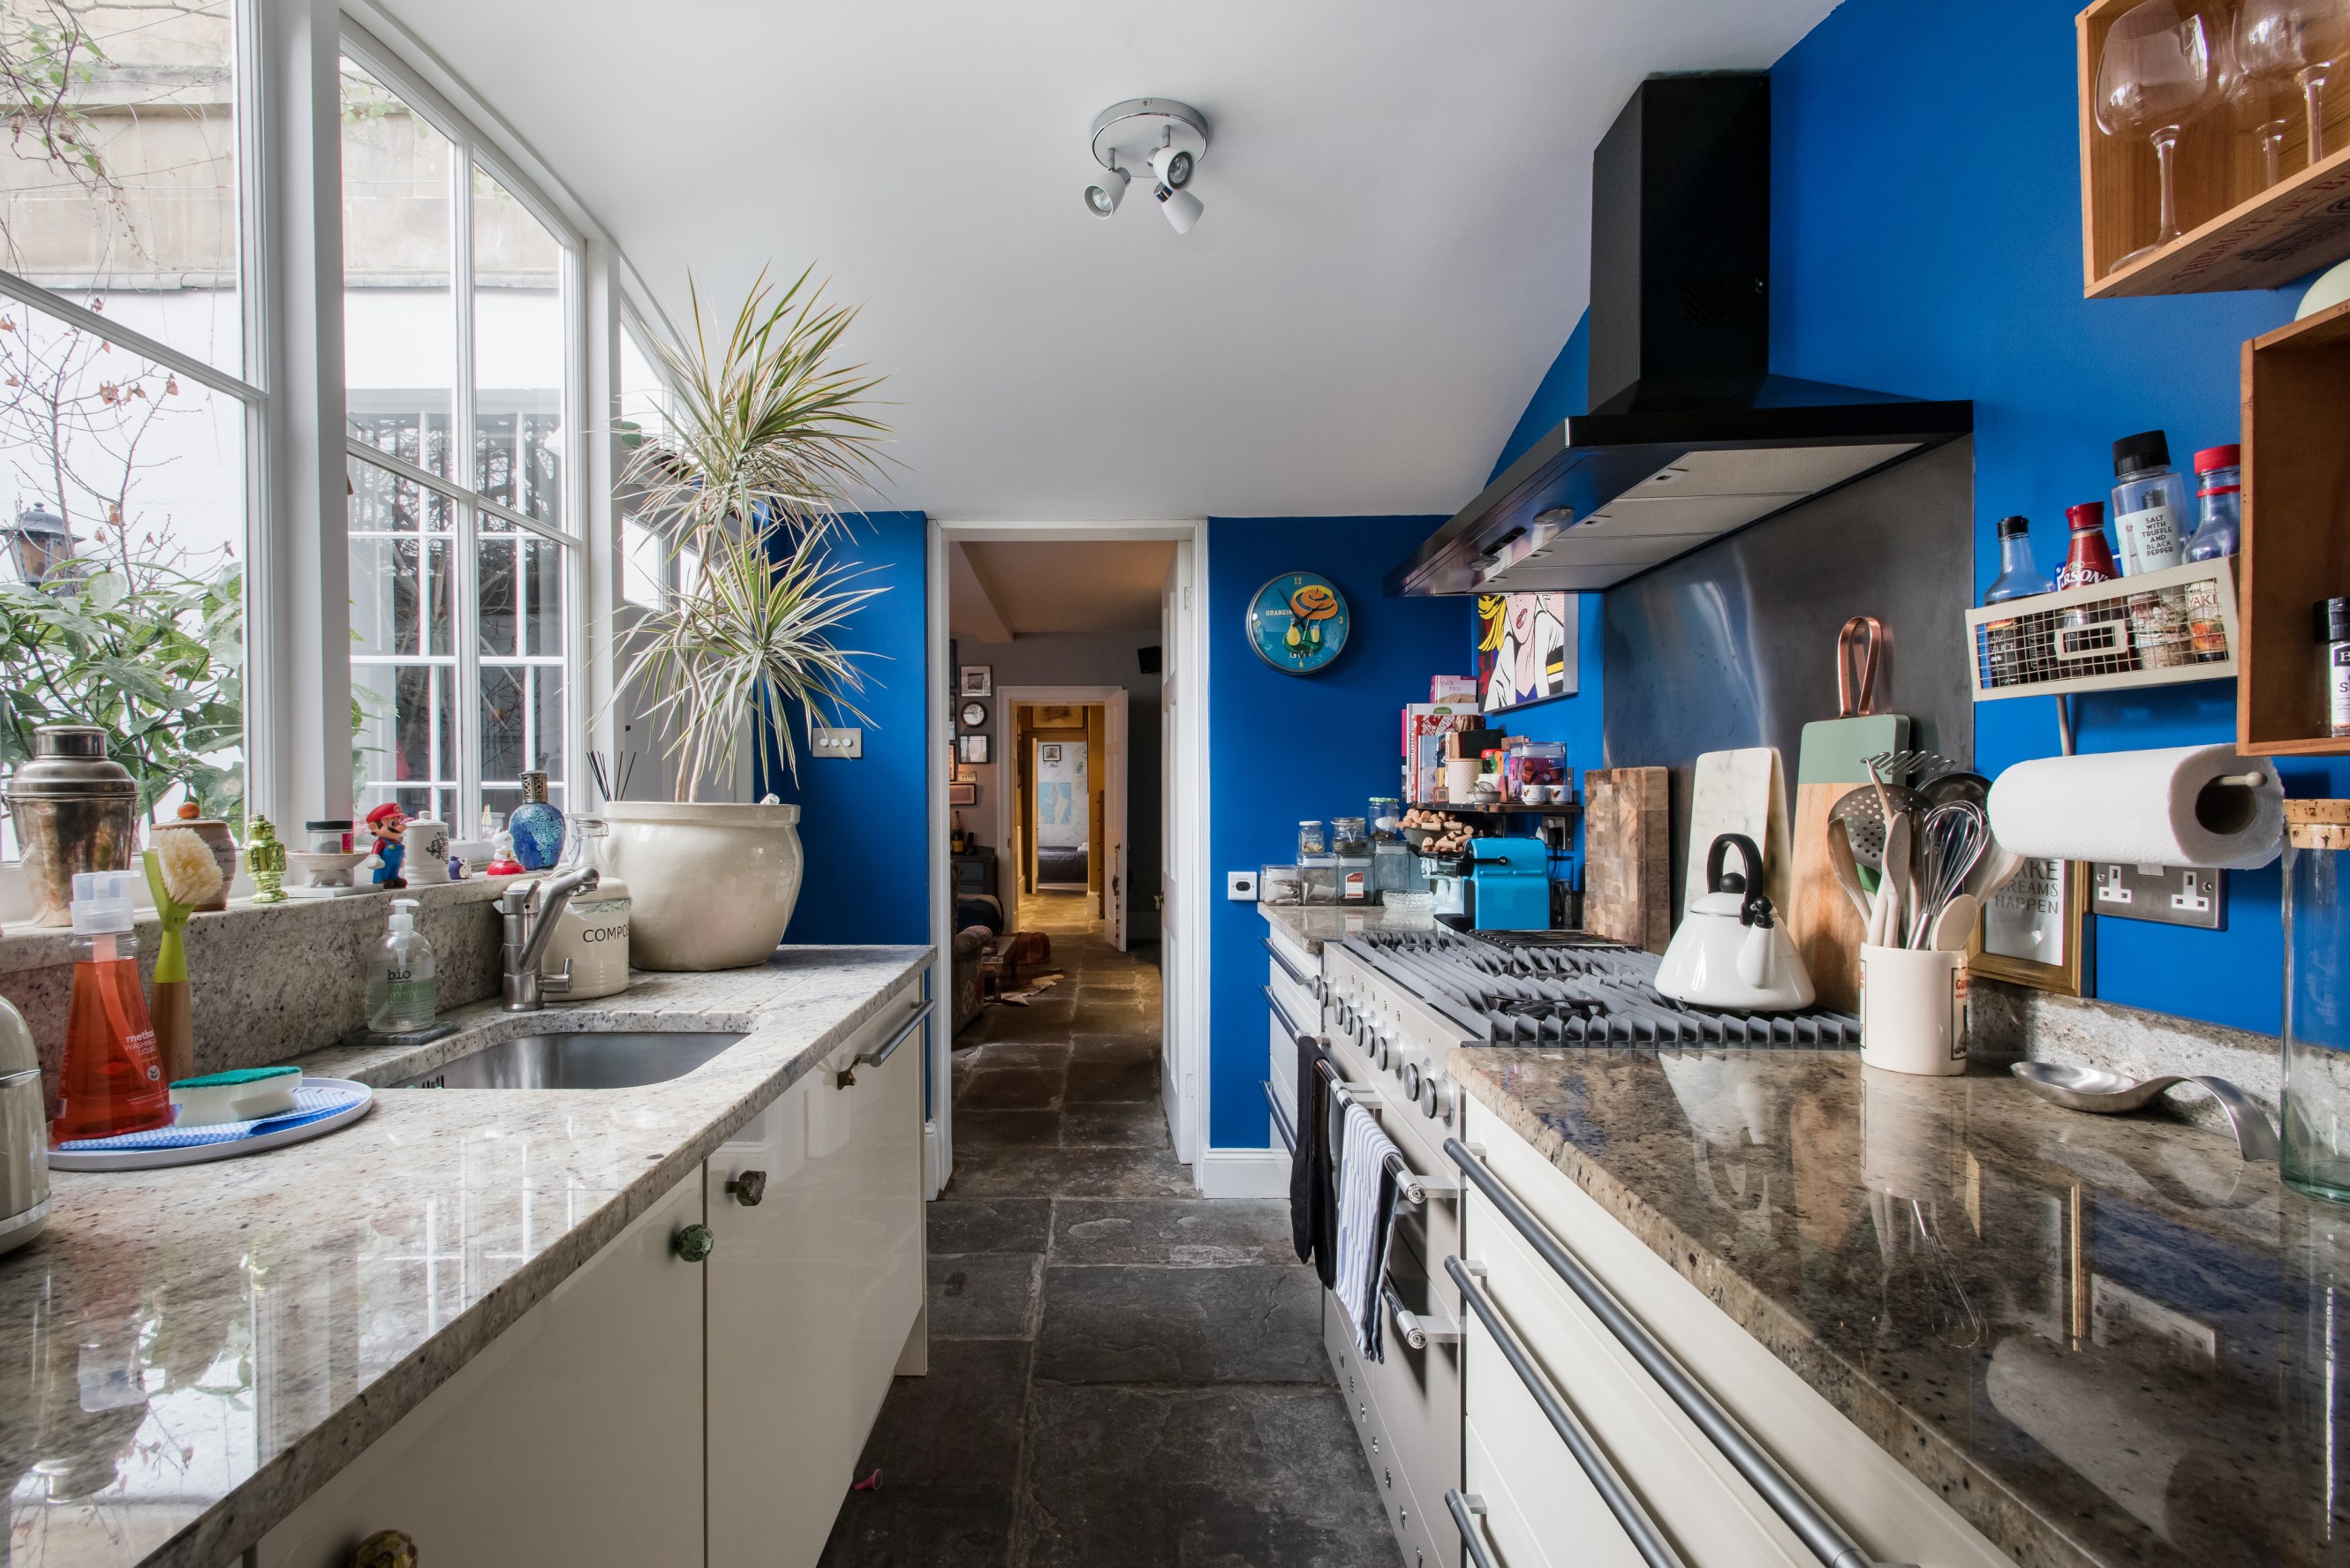 The kitchen is colourful, equipped with modern appliances and filled with plants.